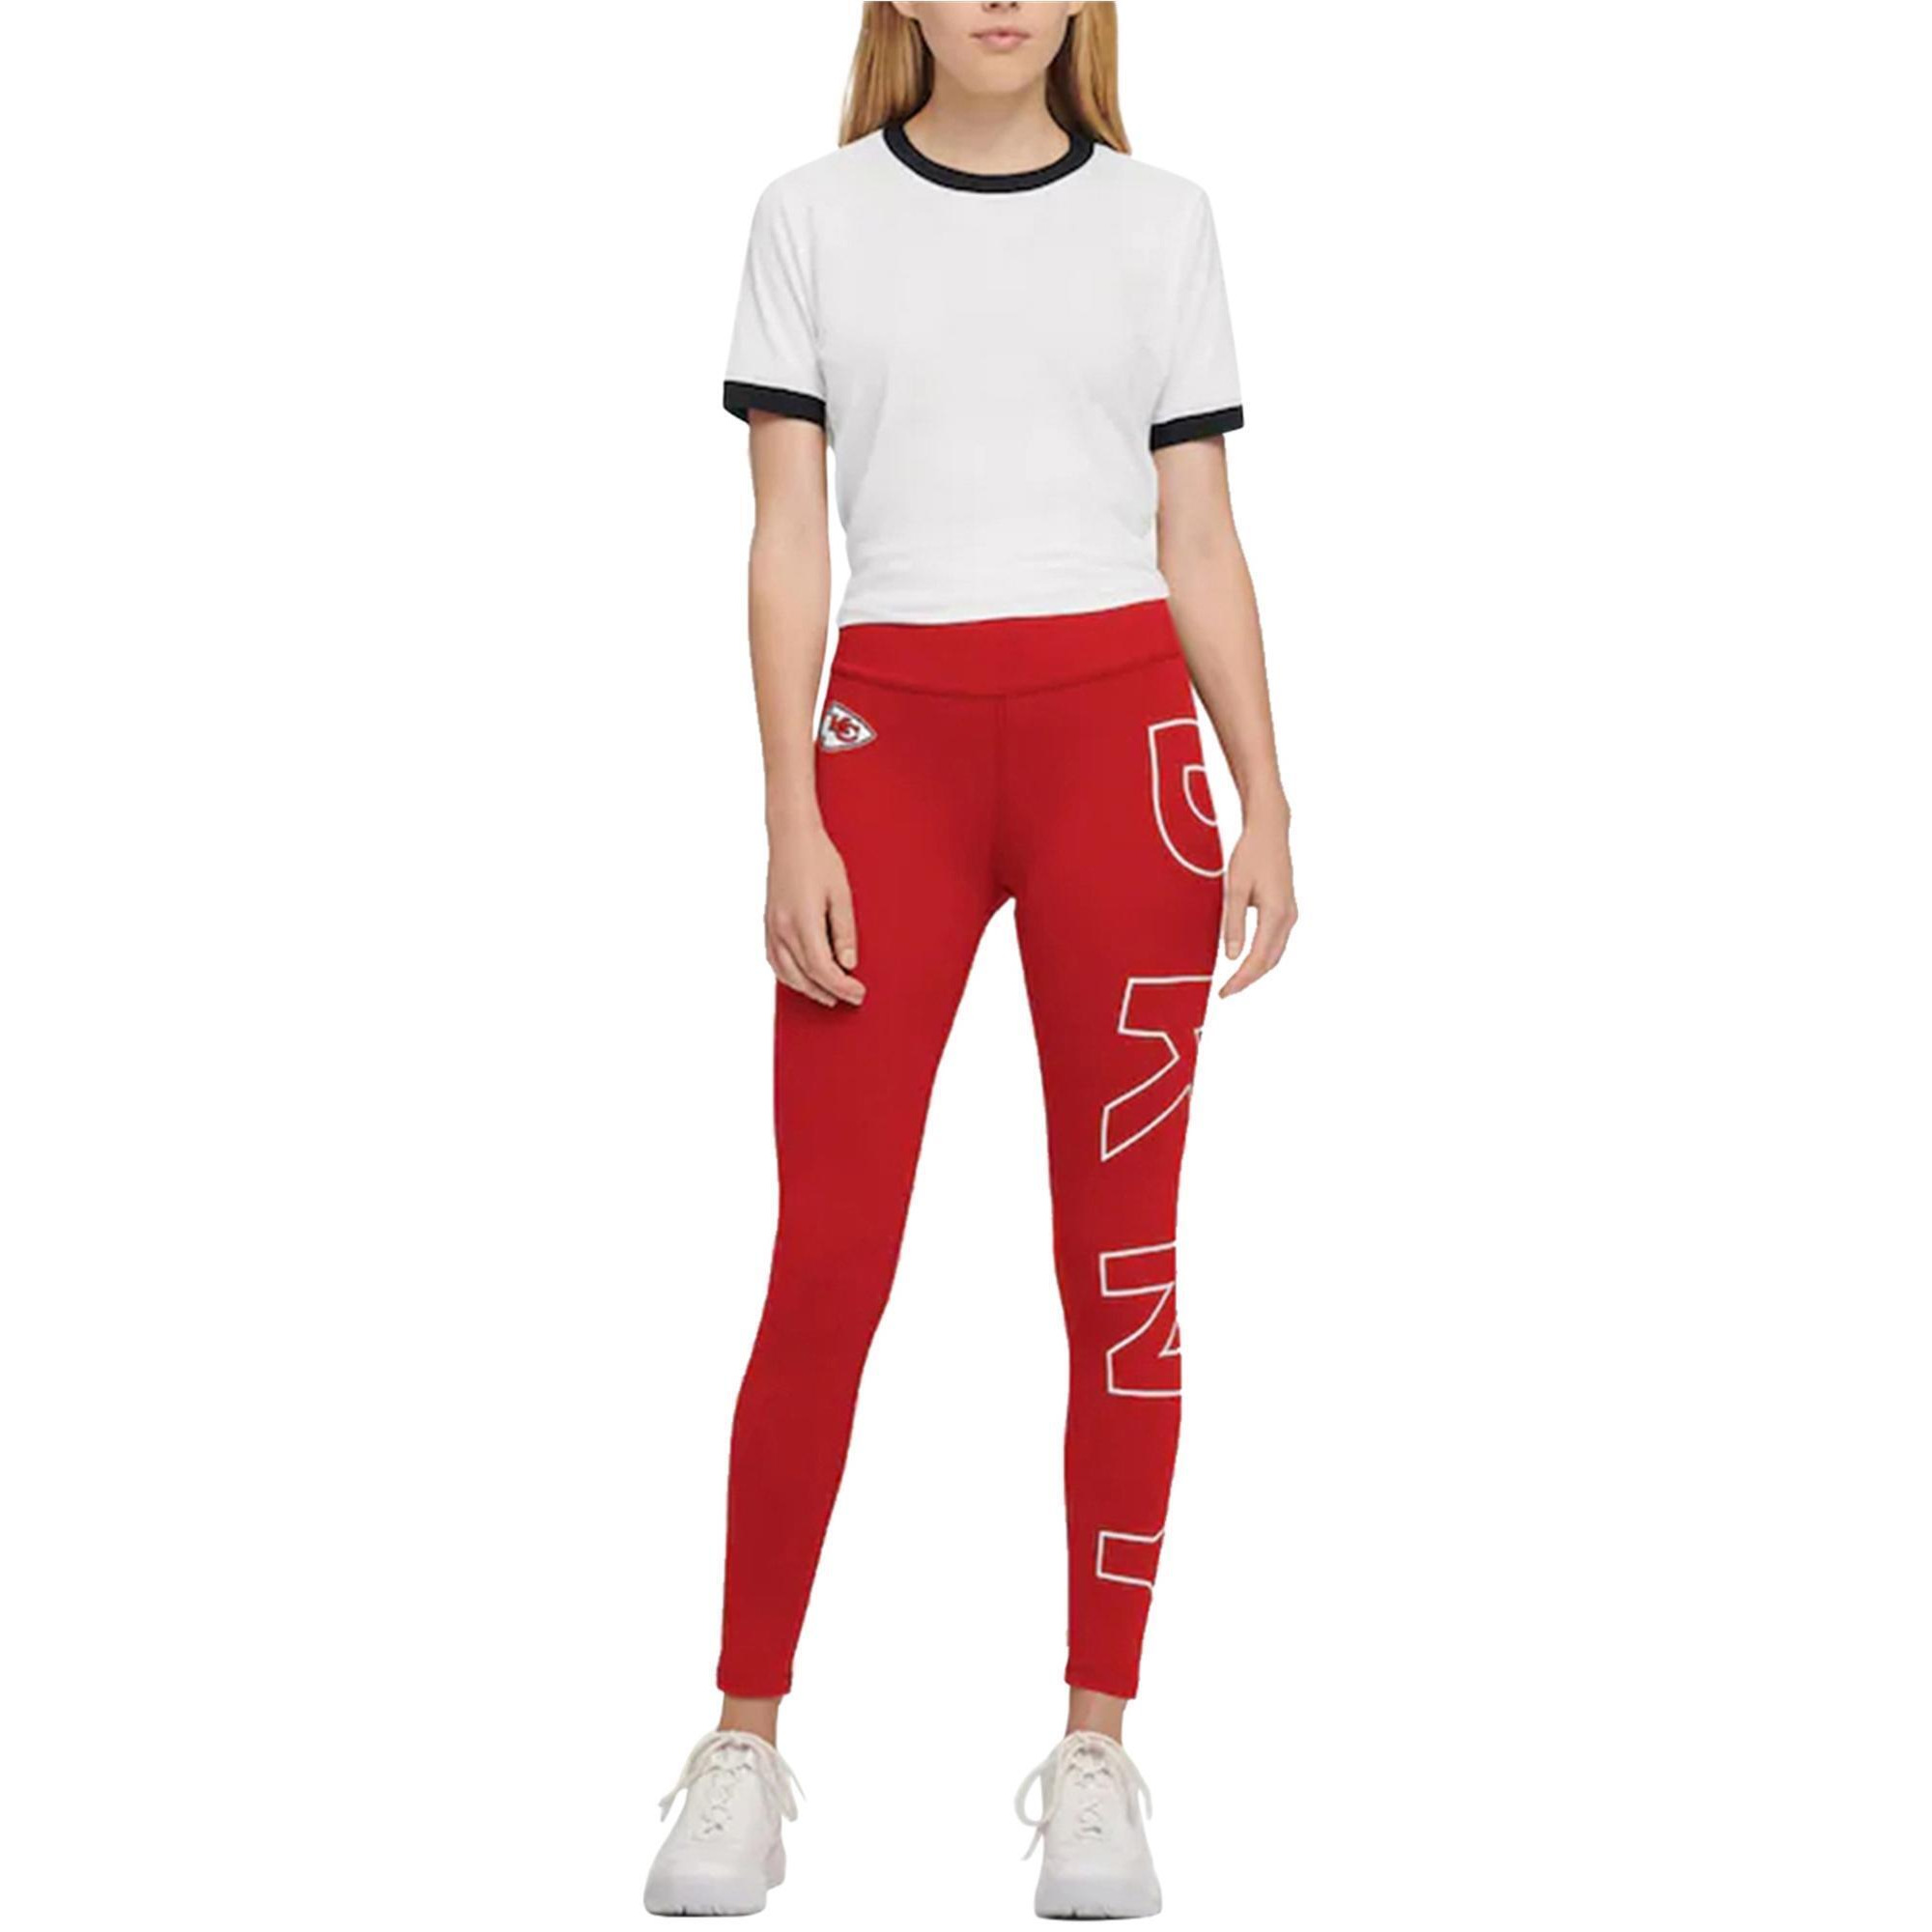 DKNY Womens Kansas City Chiefs Compression Athletic Pants, Style # DS00Z120 alternate image